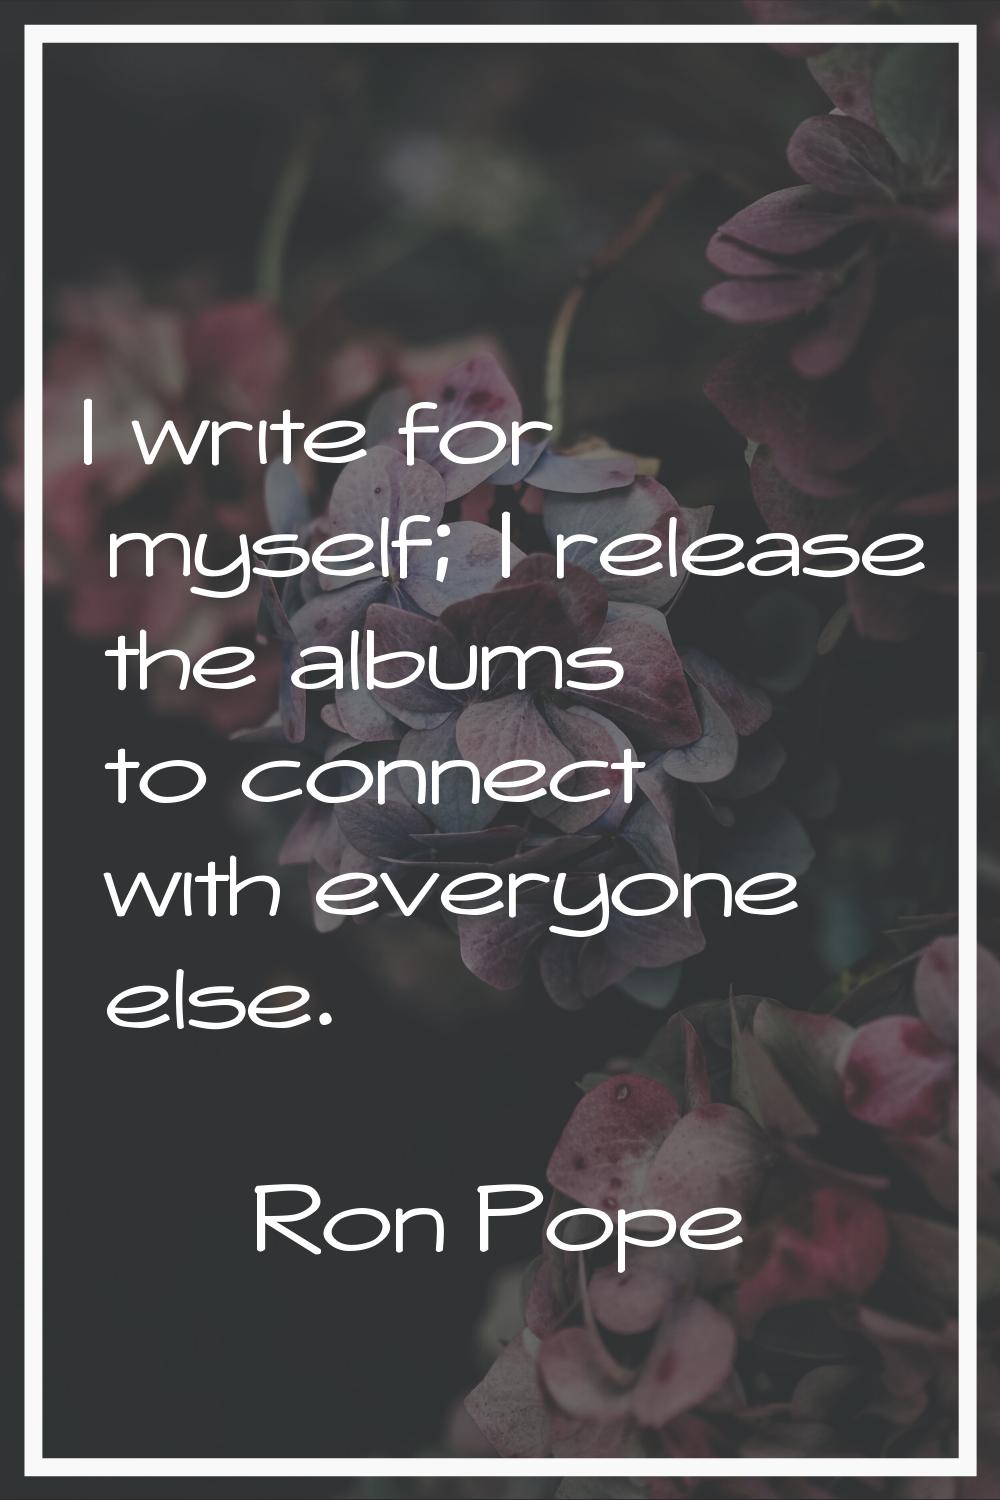 I write for myself; I release the albums to connect with everyone else.